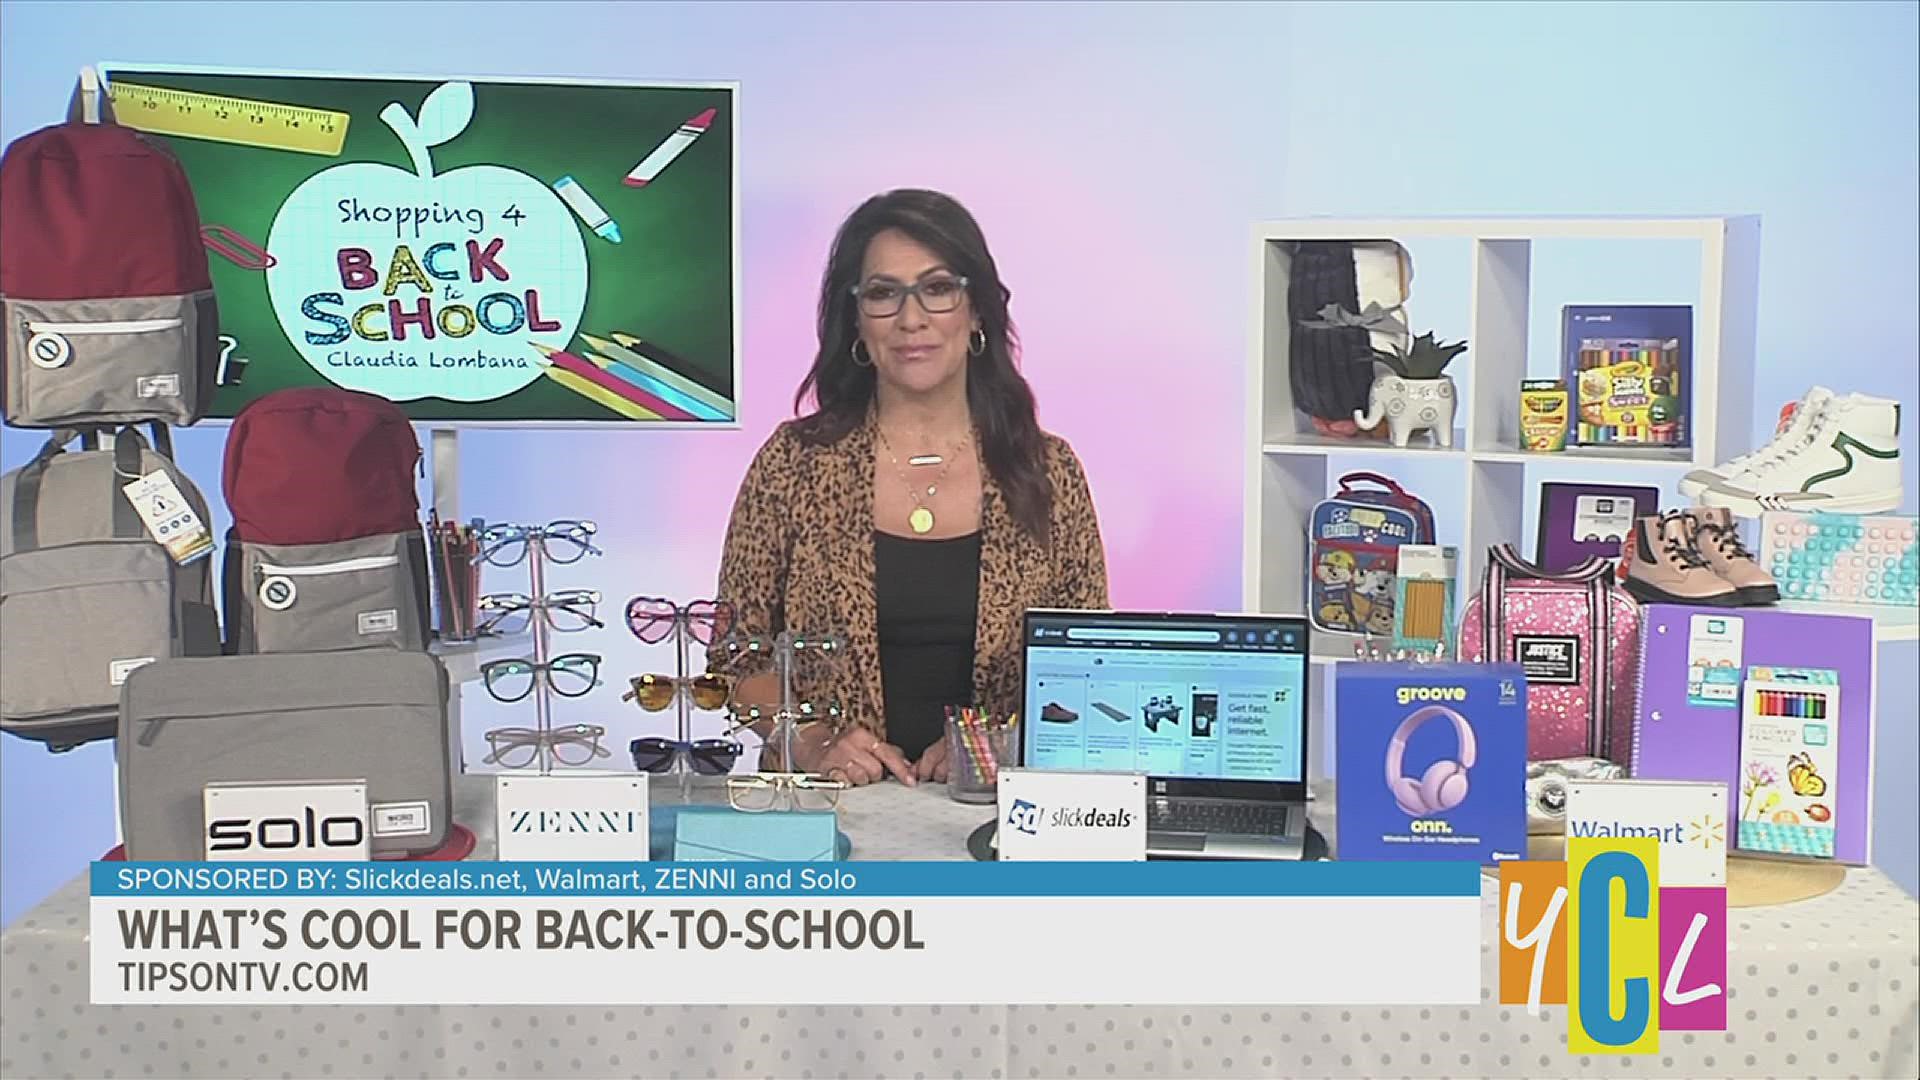 A super shopping expert shares tips for beating inflation when searching for back to school items. This segment paid for by Slickdeals.net, Walmart, ZENNI and Solo.